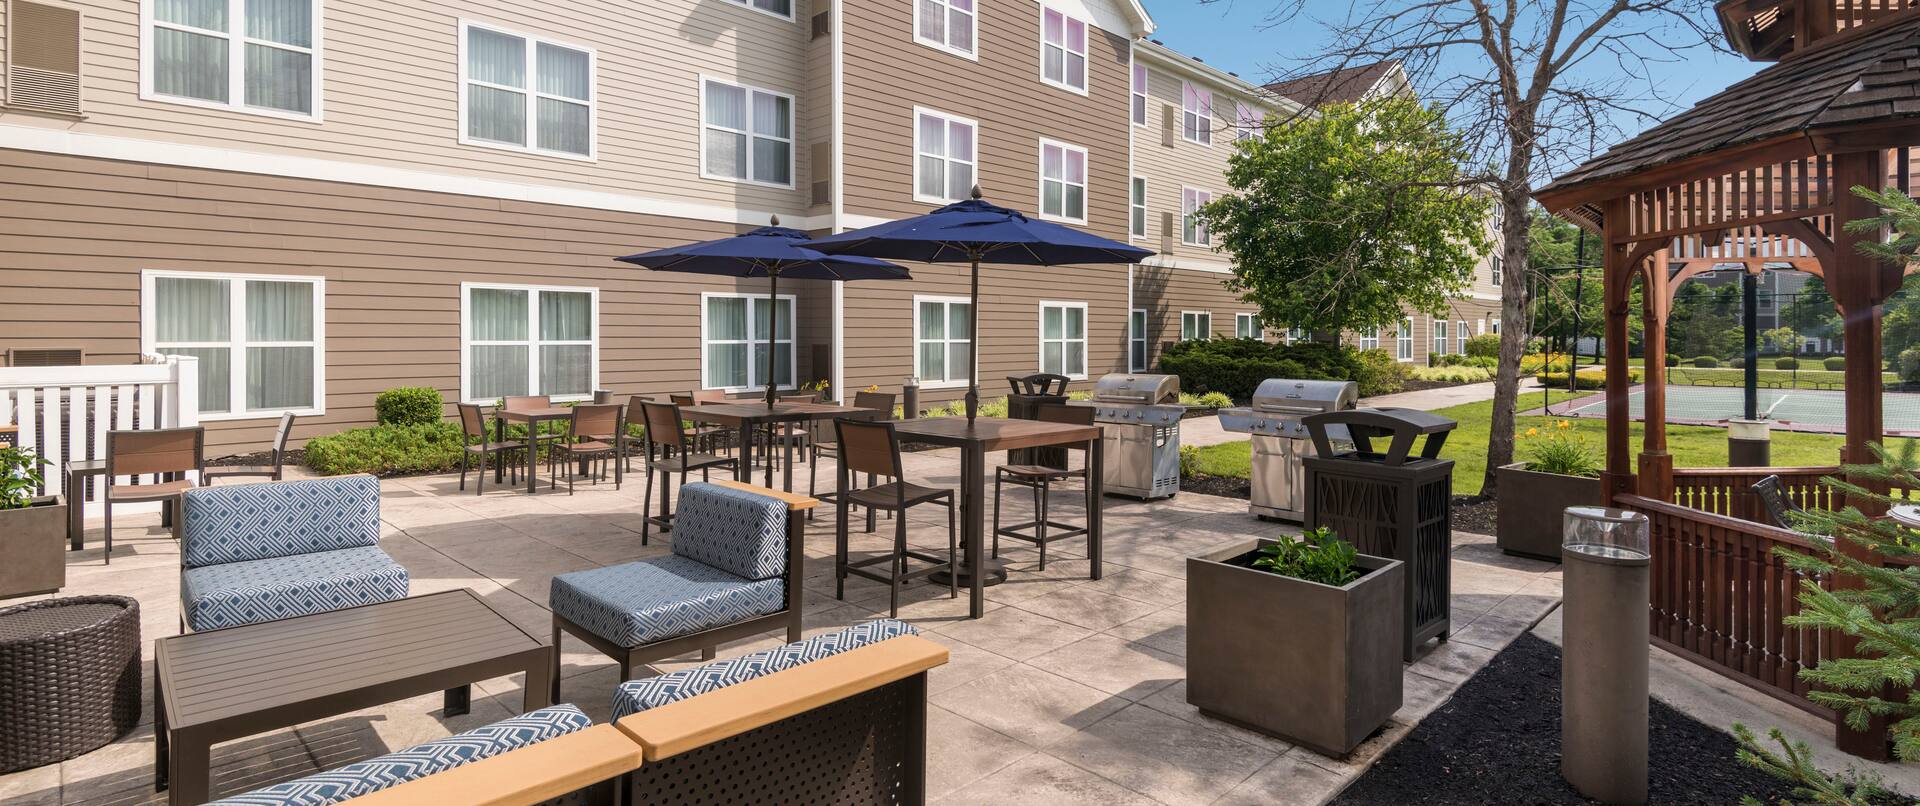 outdoor patio and grills